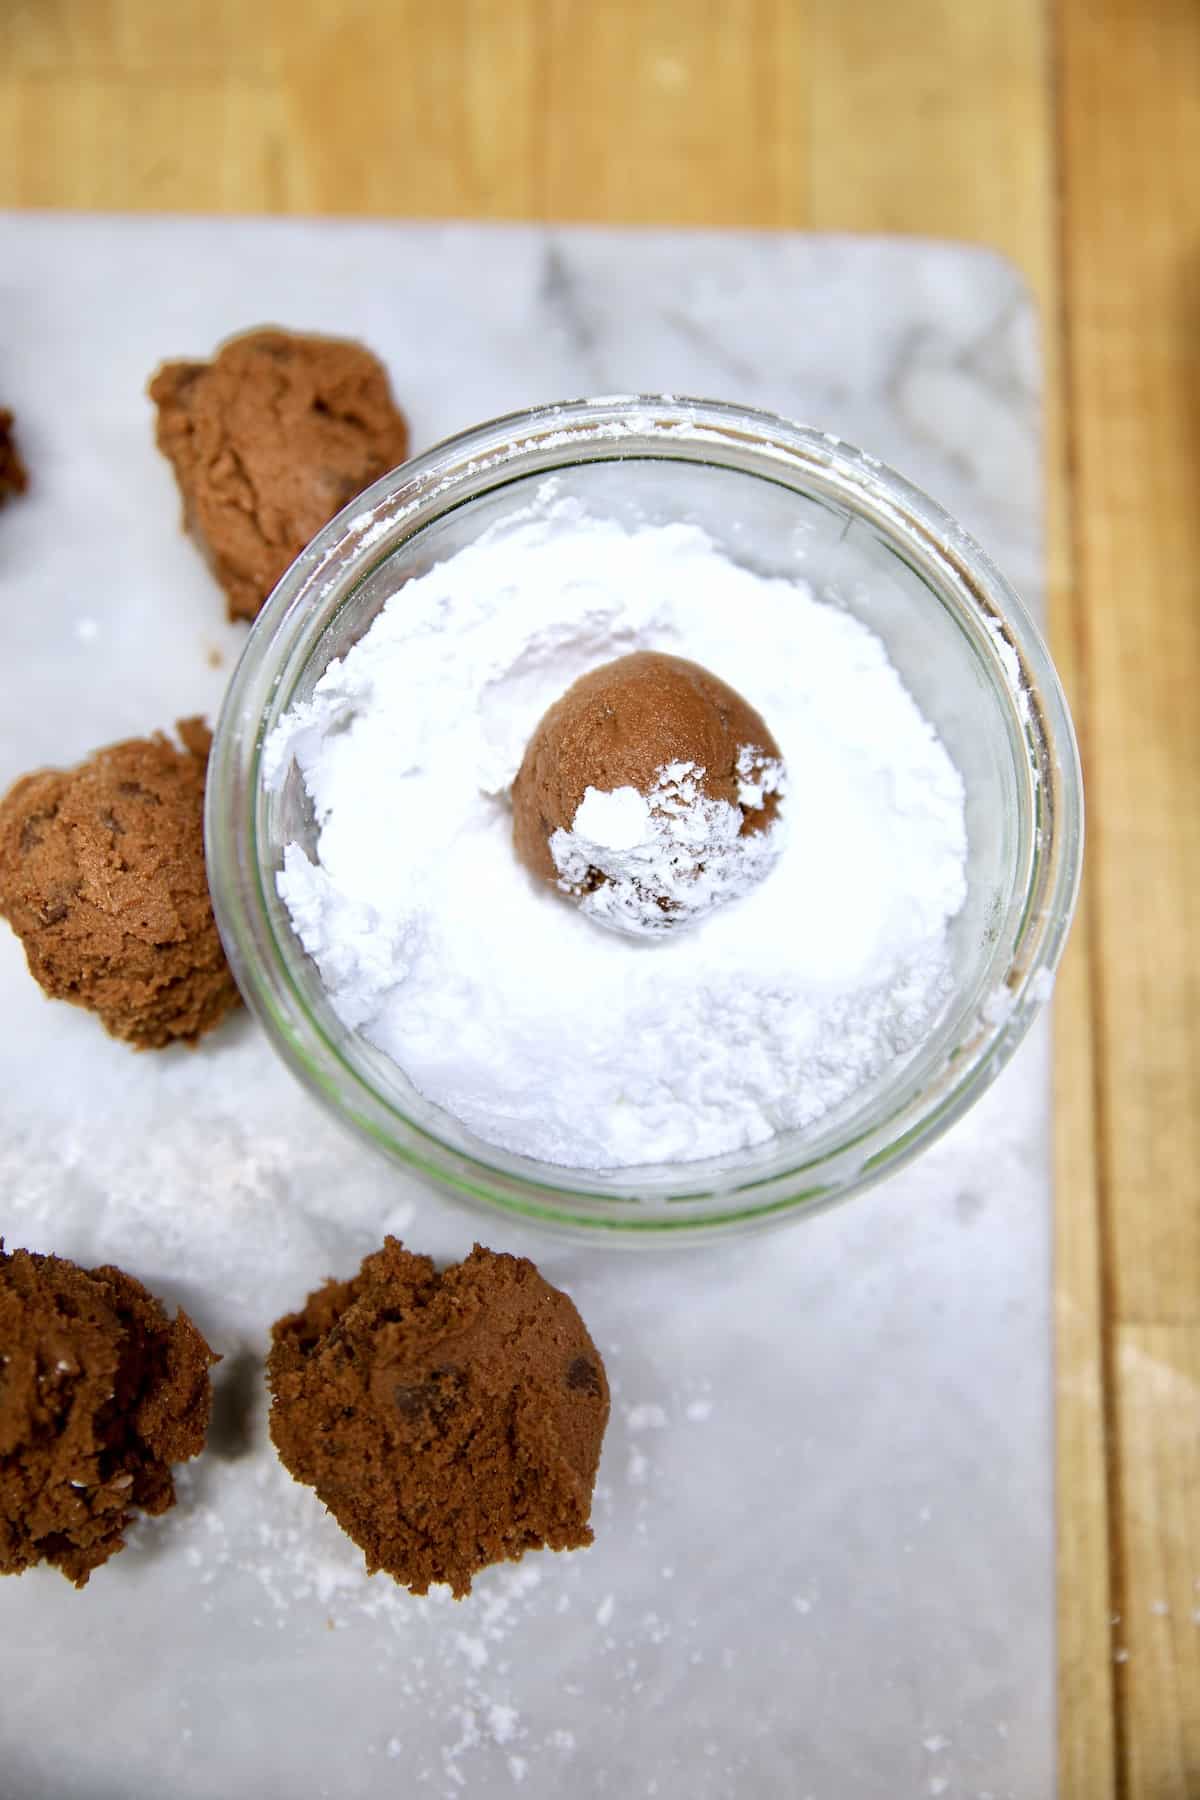 Rolling chocolate cookie dough in powdered sugar.